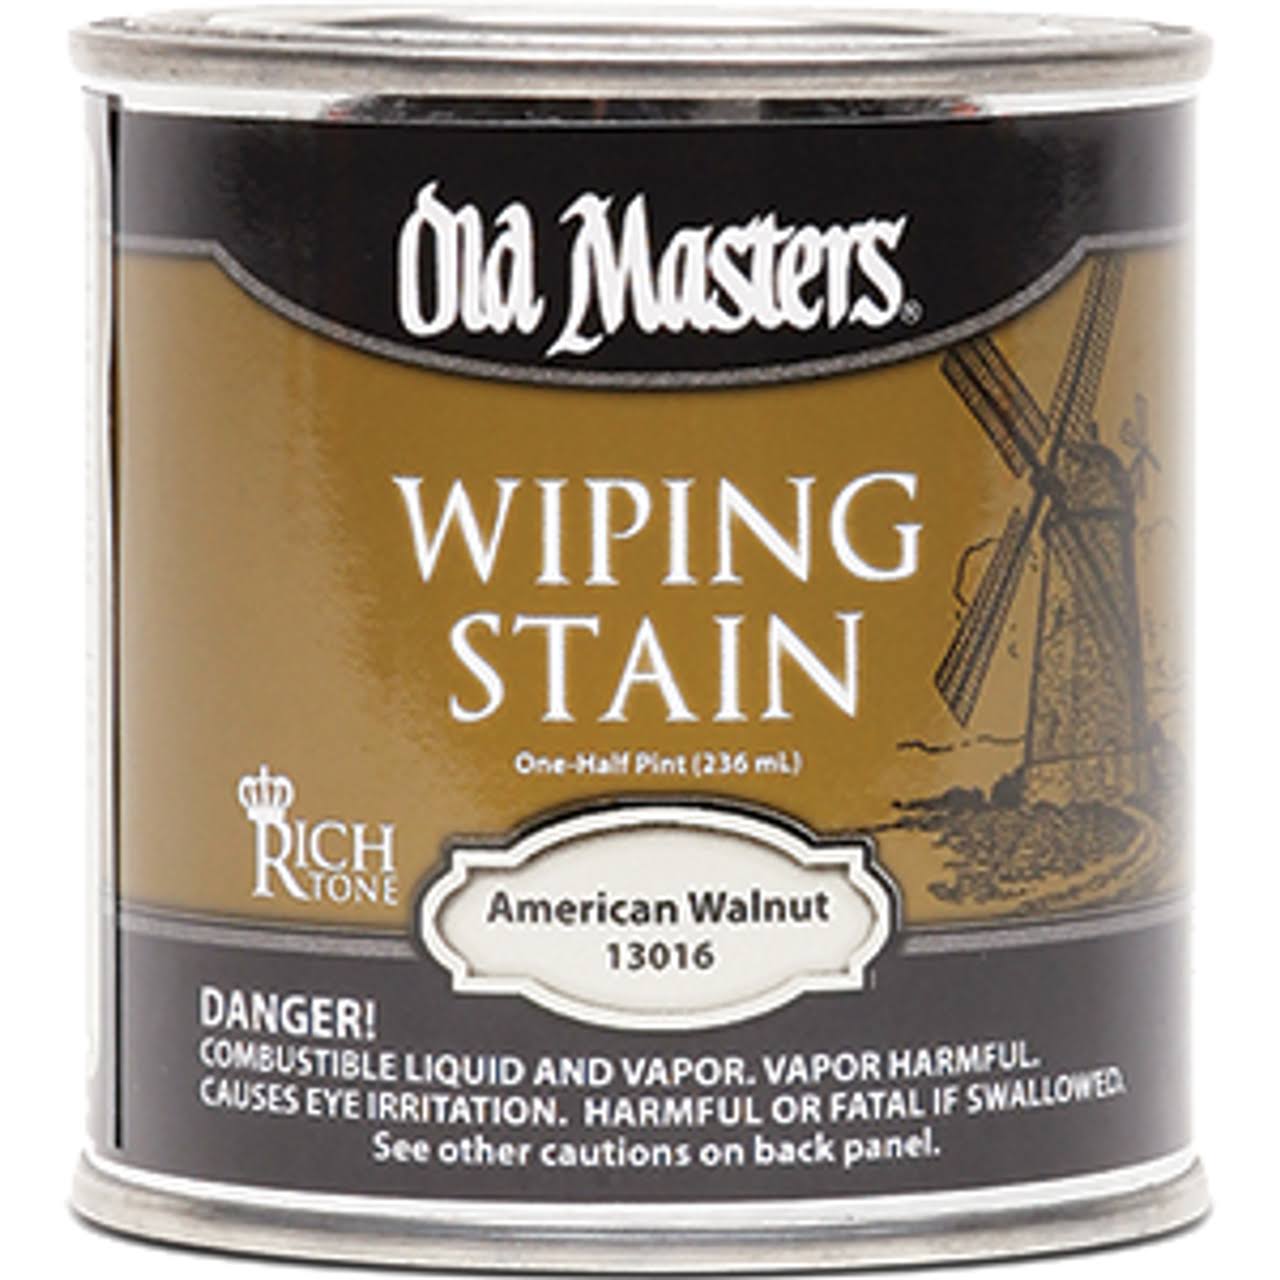 Old Masters 13016 Stain Wiping - American Walnut, 1/2pt